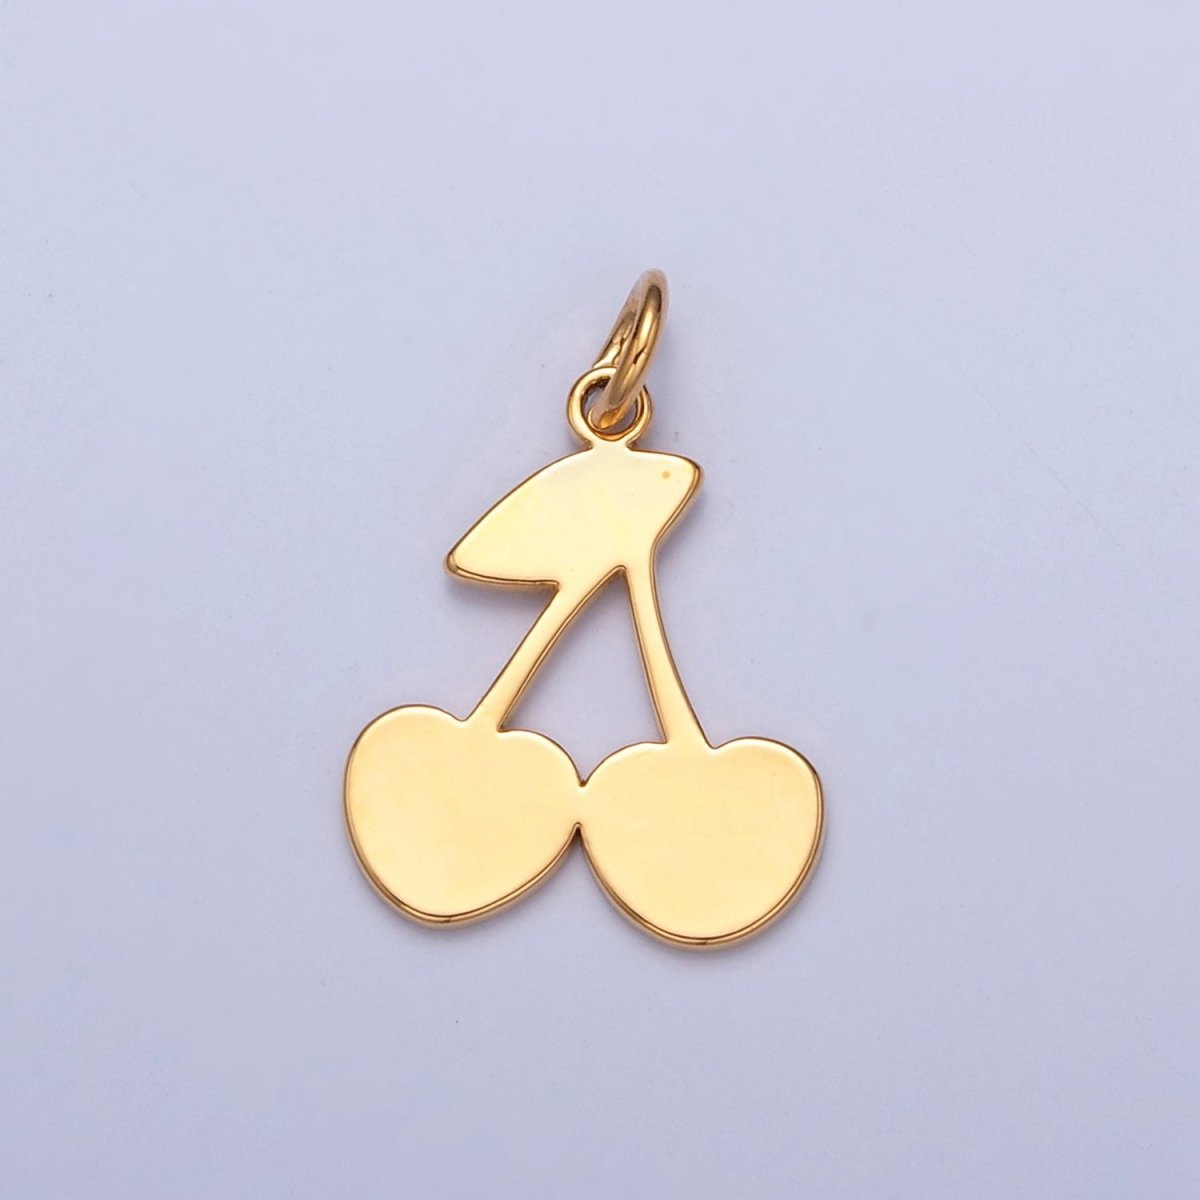 OS Dainty Gold Flat Cherry Pendant Only Charm for Necklace Bracelet Earring 14K or 24K Gold Filled W-252 W-468 - DLUXCA